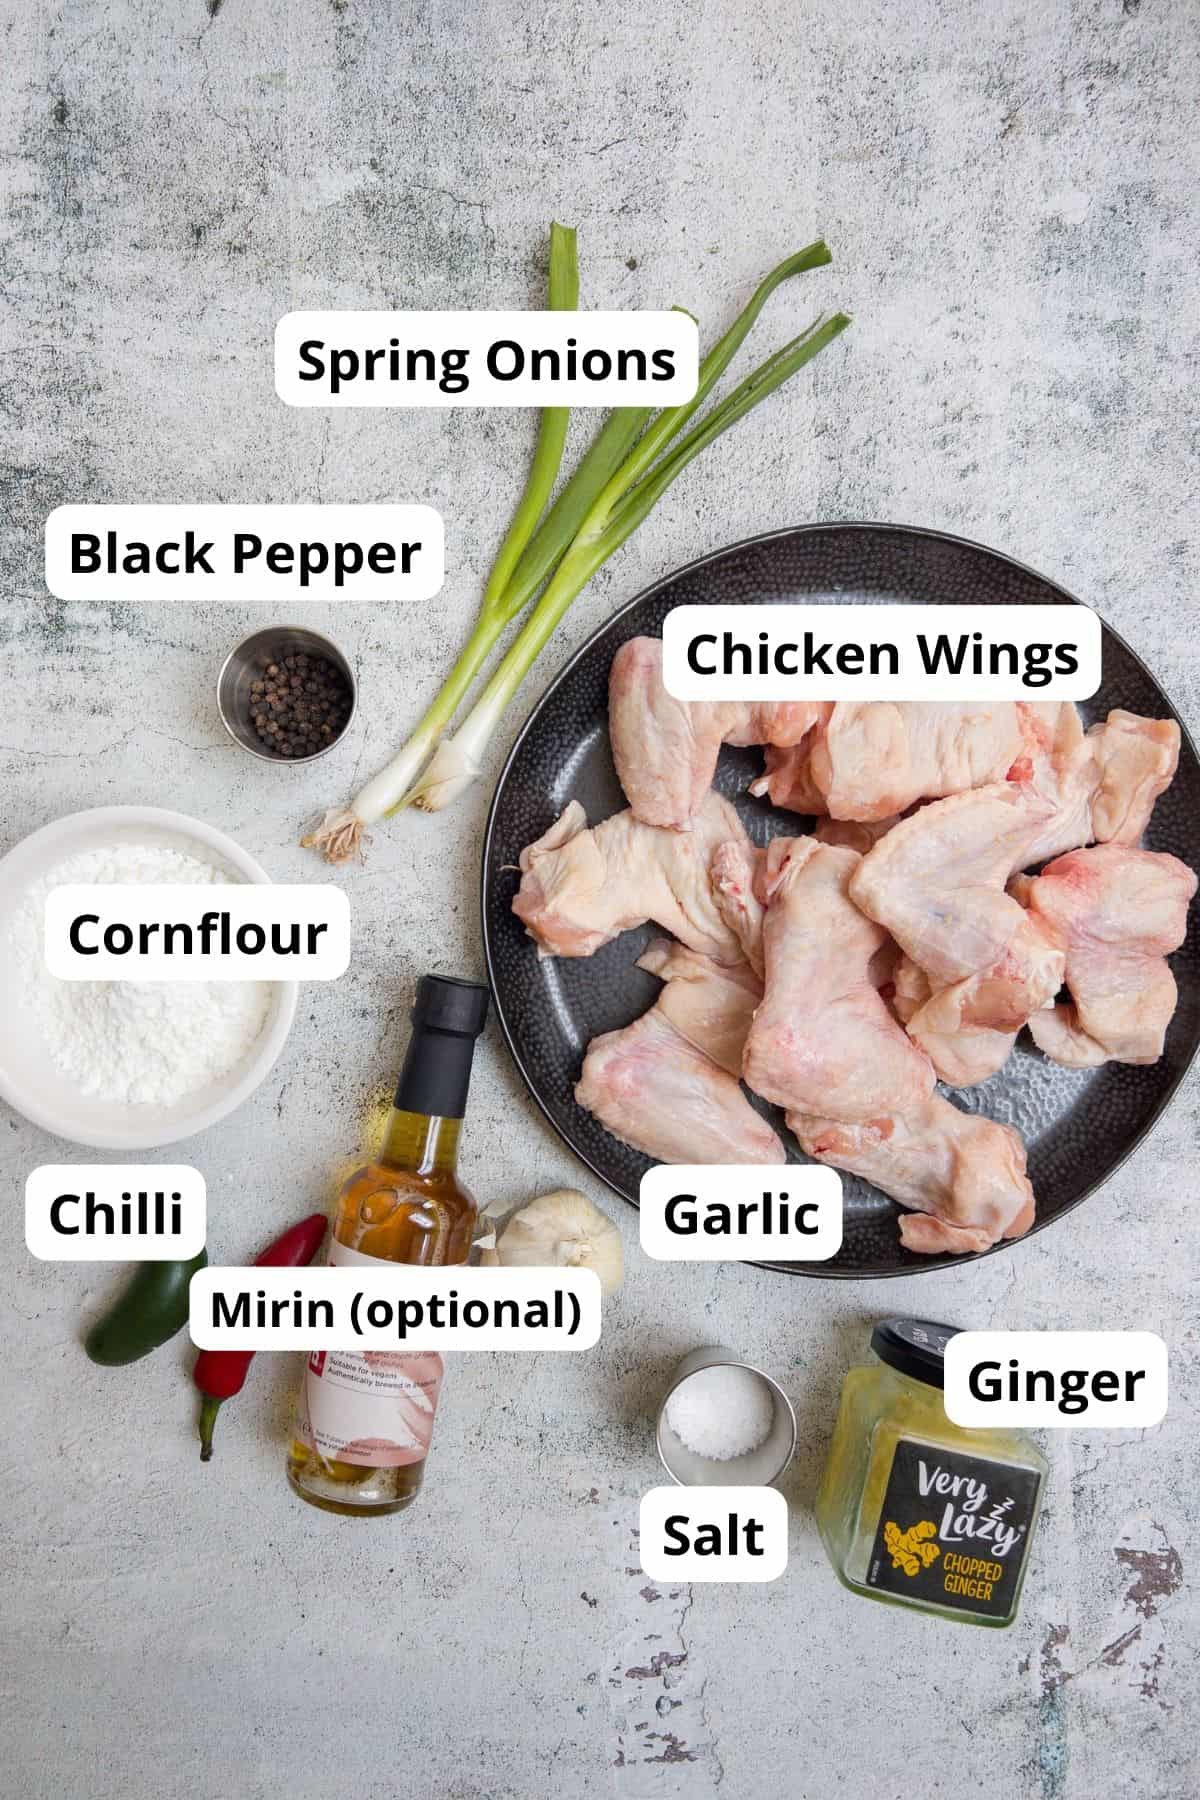 ingredients laid out to make salt and pepper chinese style chicken wings